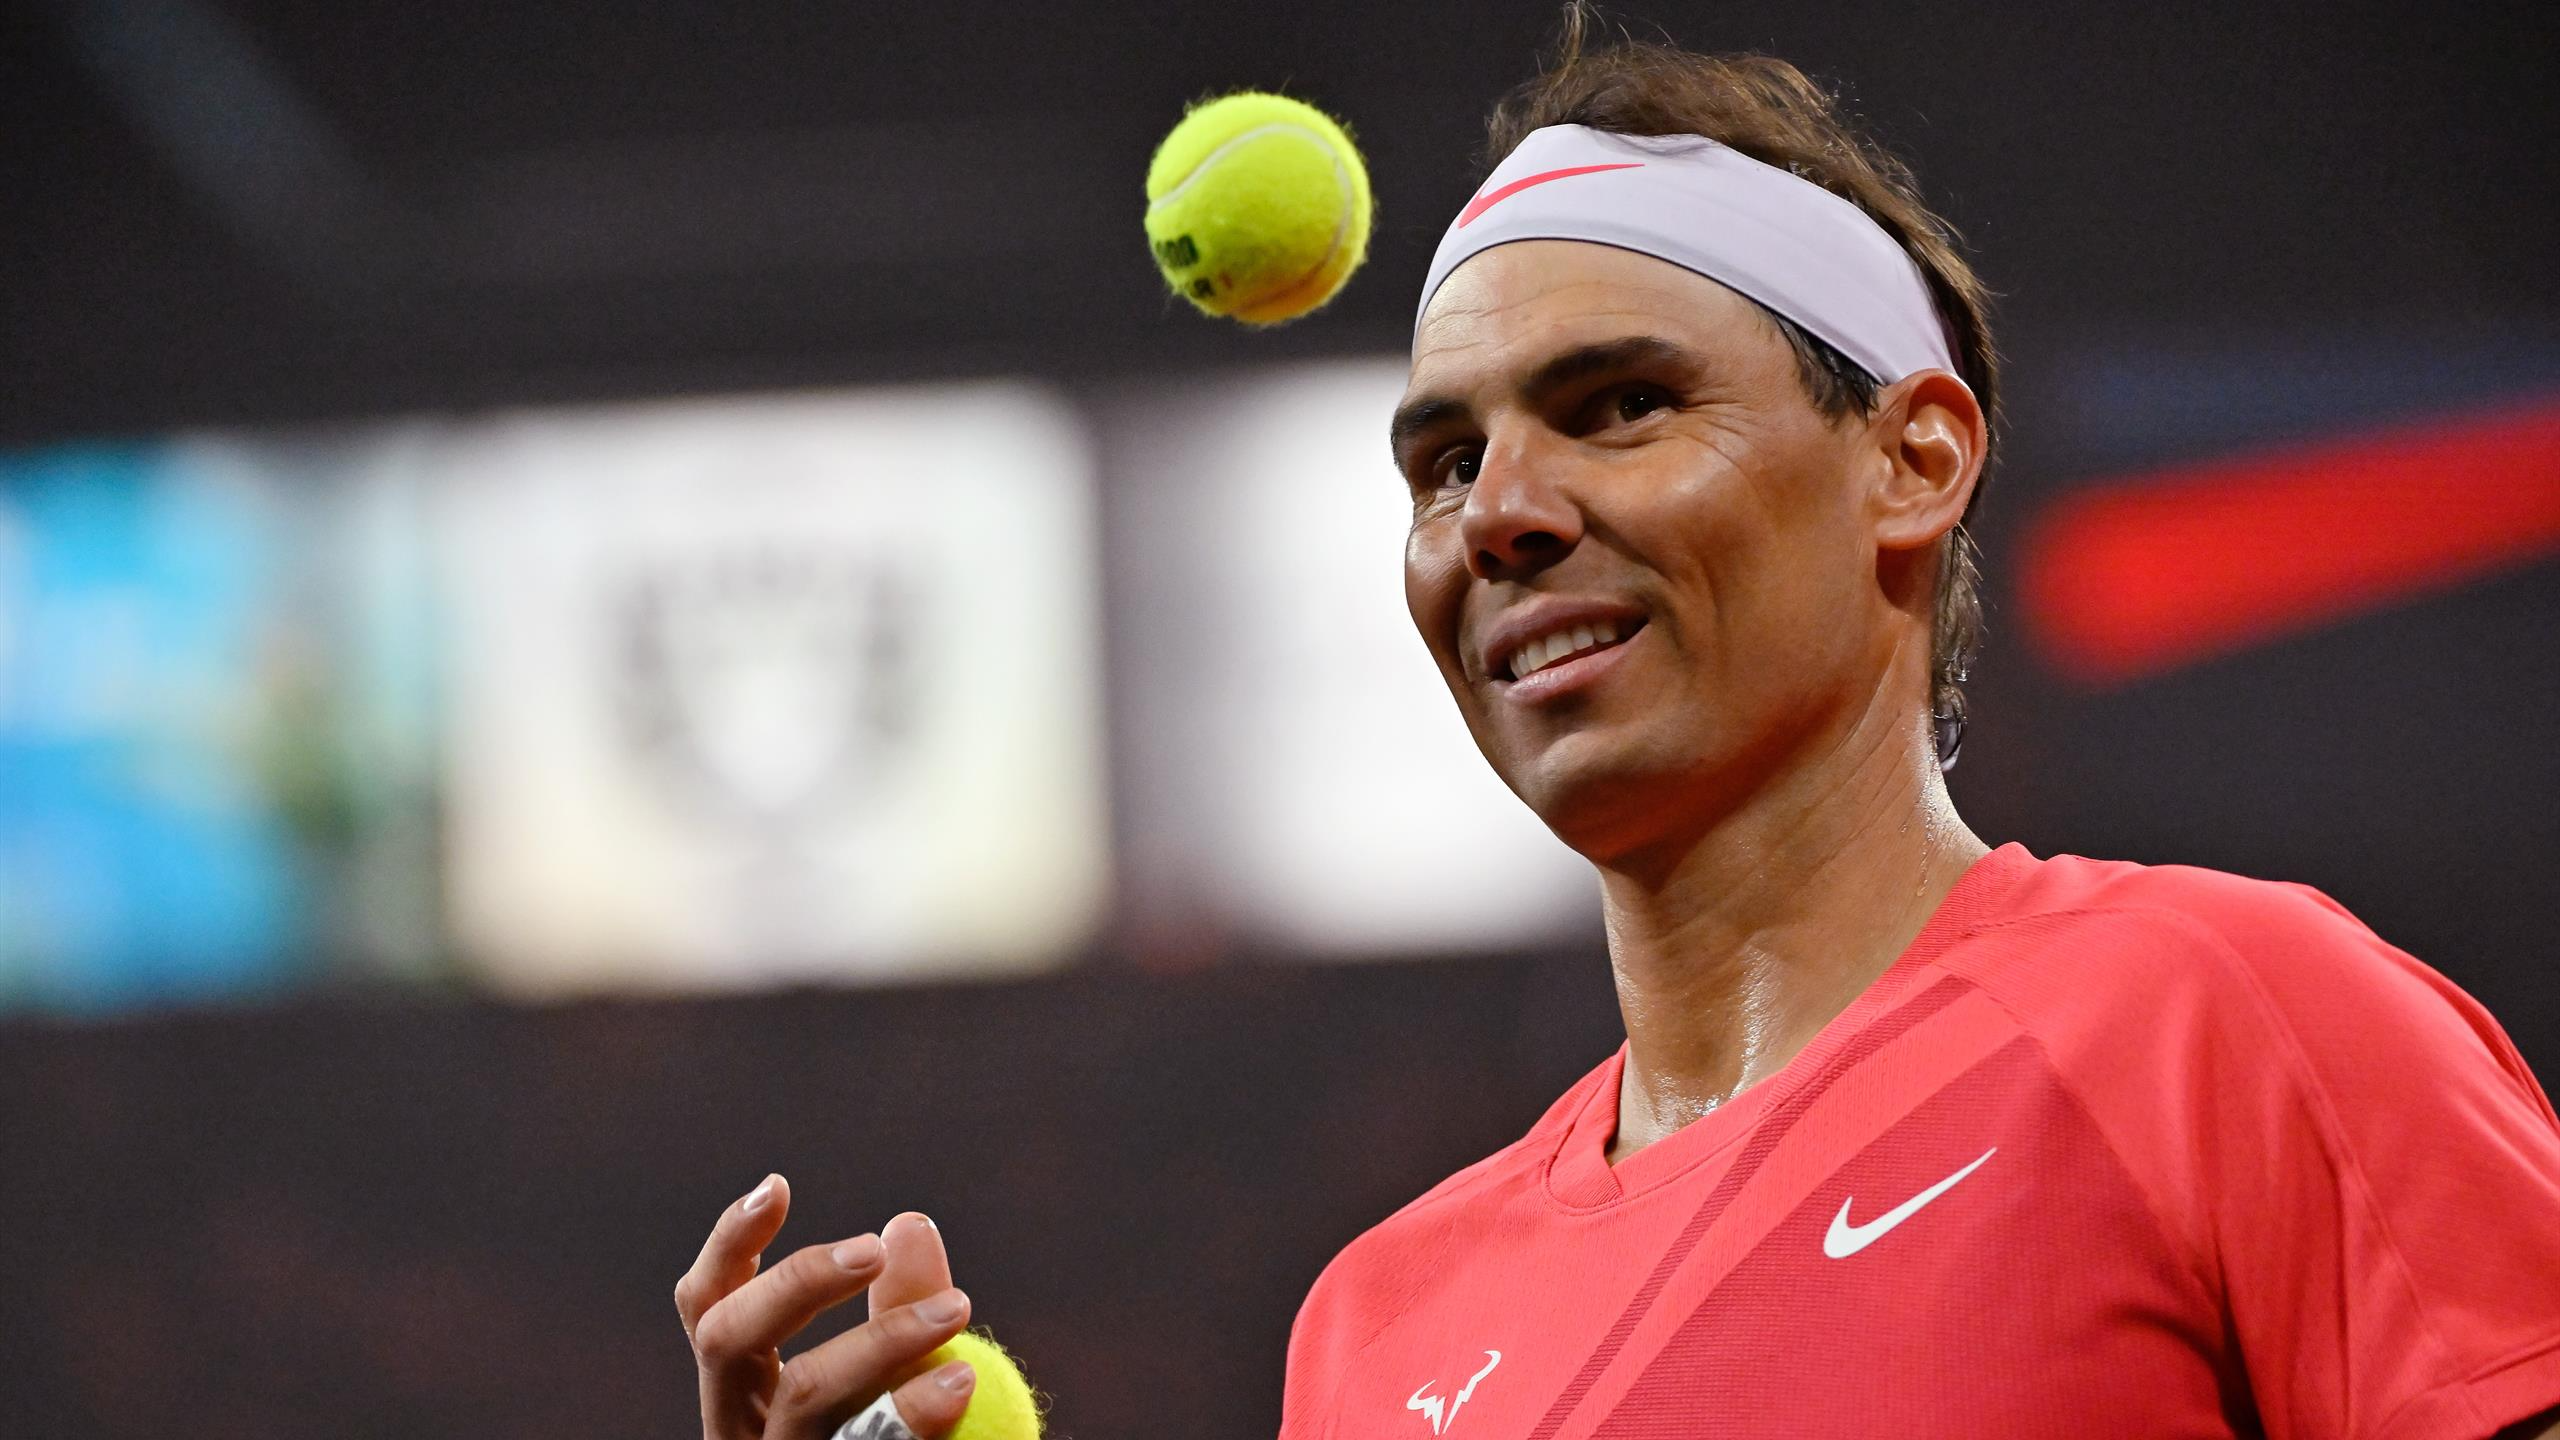 Nadal Confesses Playing Is Getting Harder For Him Physically